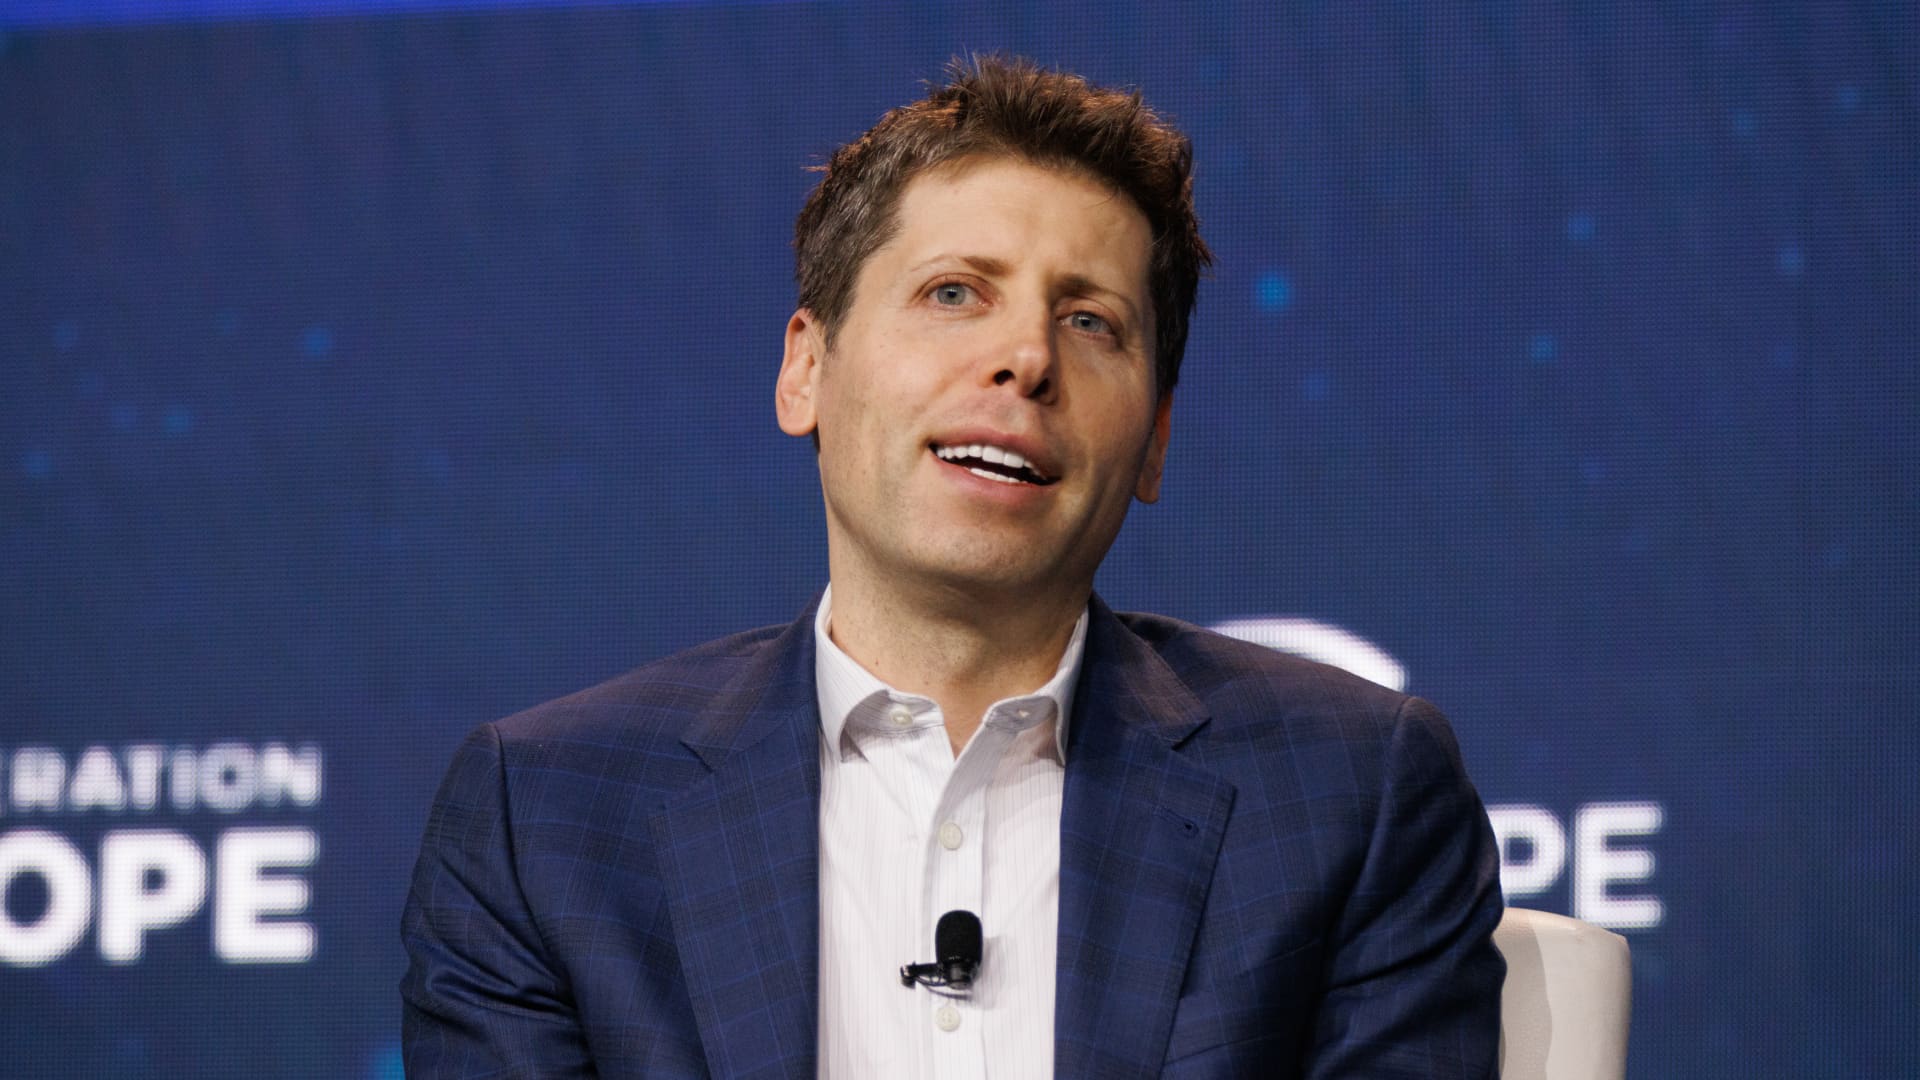 OpenAI CEO Sam Altman seeks as much as $7 trillion for new AI chip project: Report